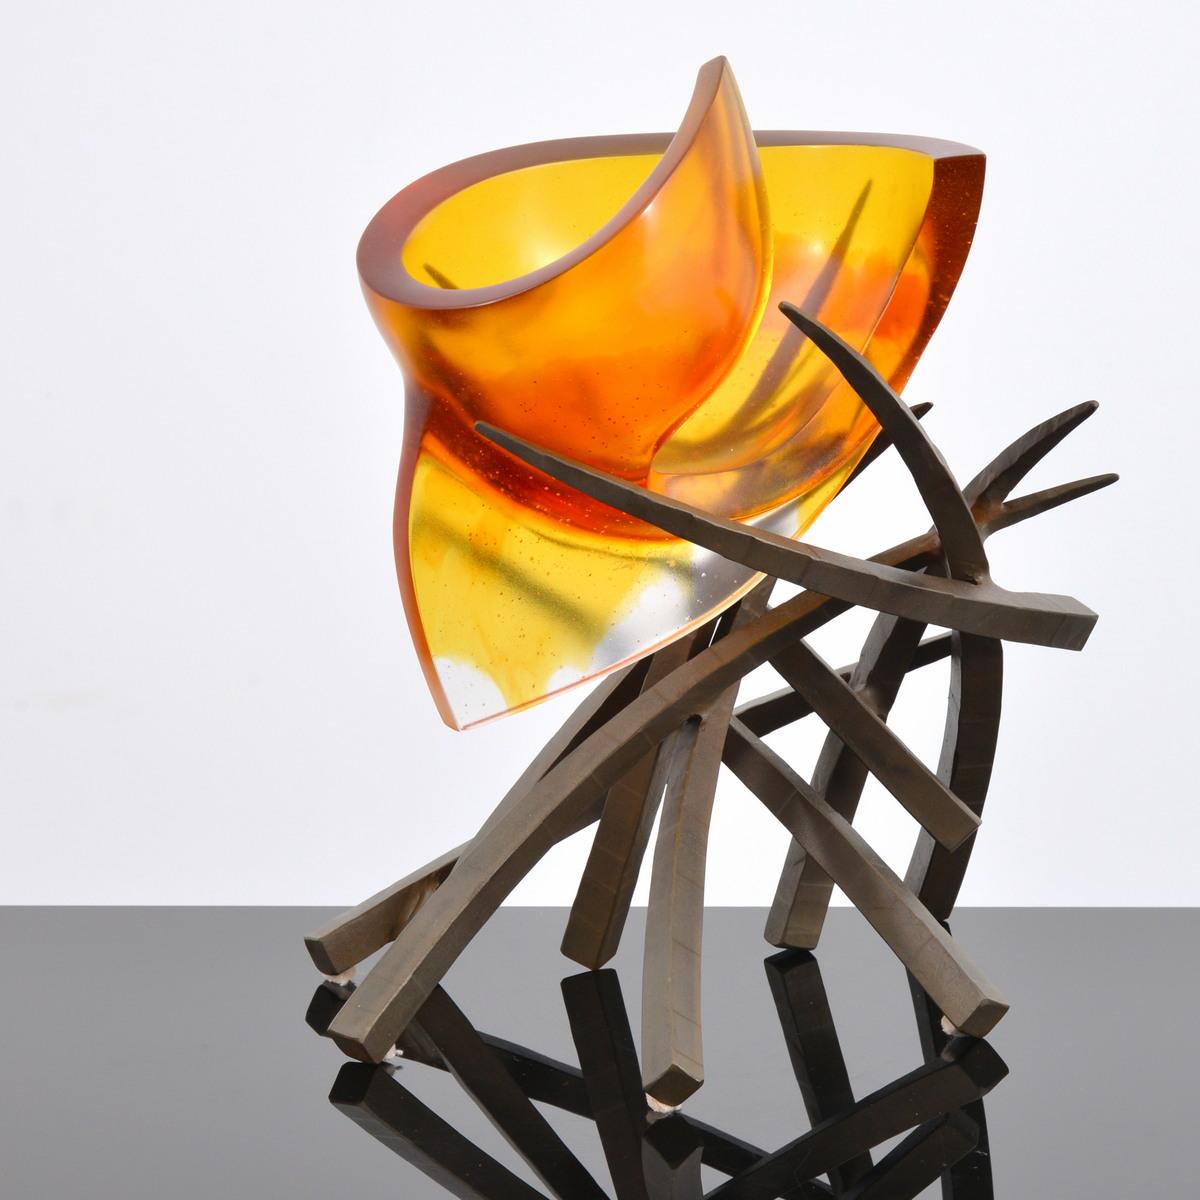 Additional Information: Brian Russell is known for his innovative approach to various mediums, expecially glass and metal.

Marking(s); notes: signed; 2007

Country of origin; materials: glass, metal

